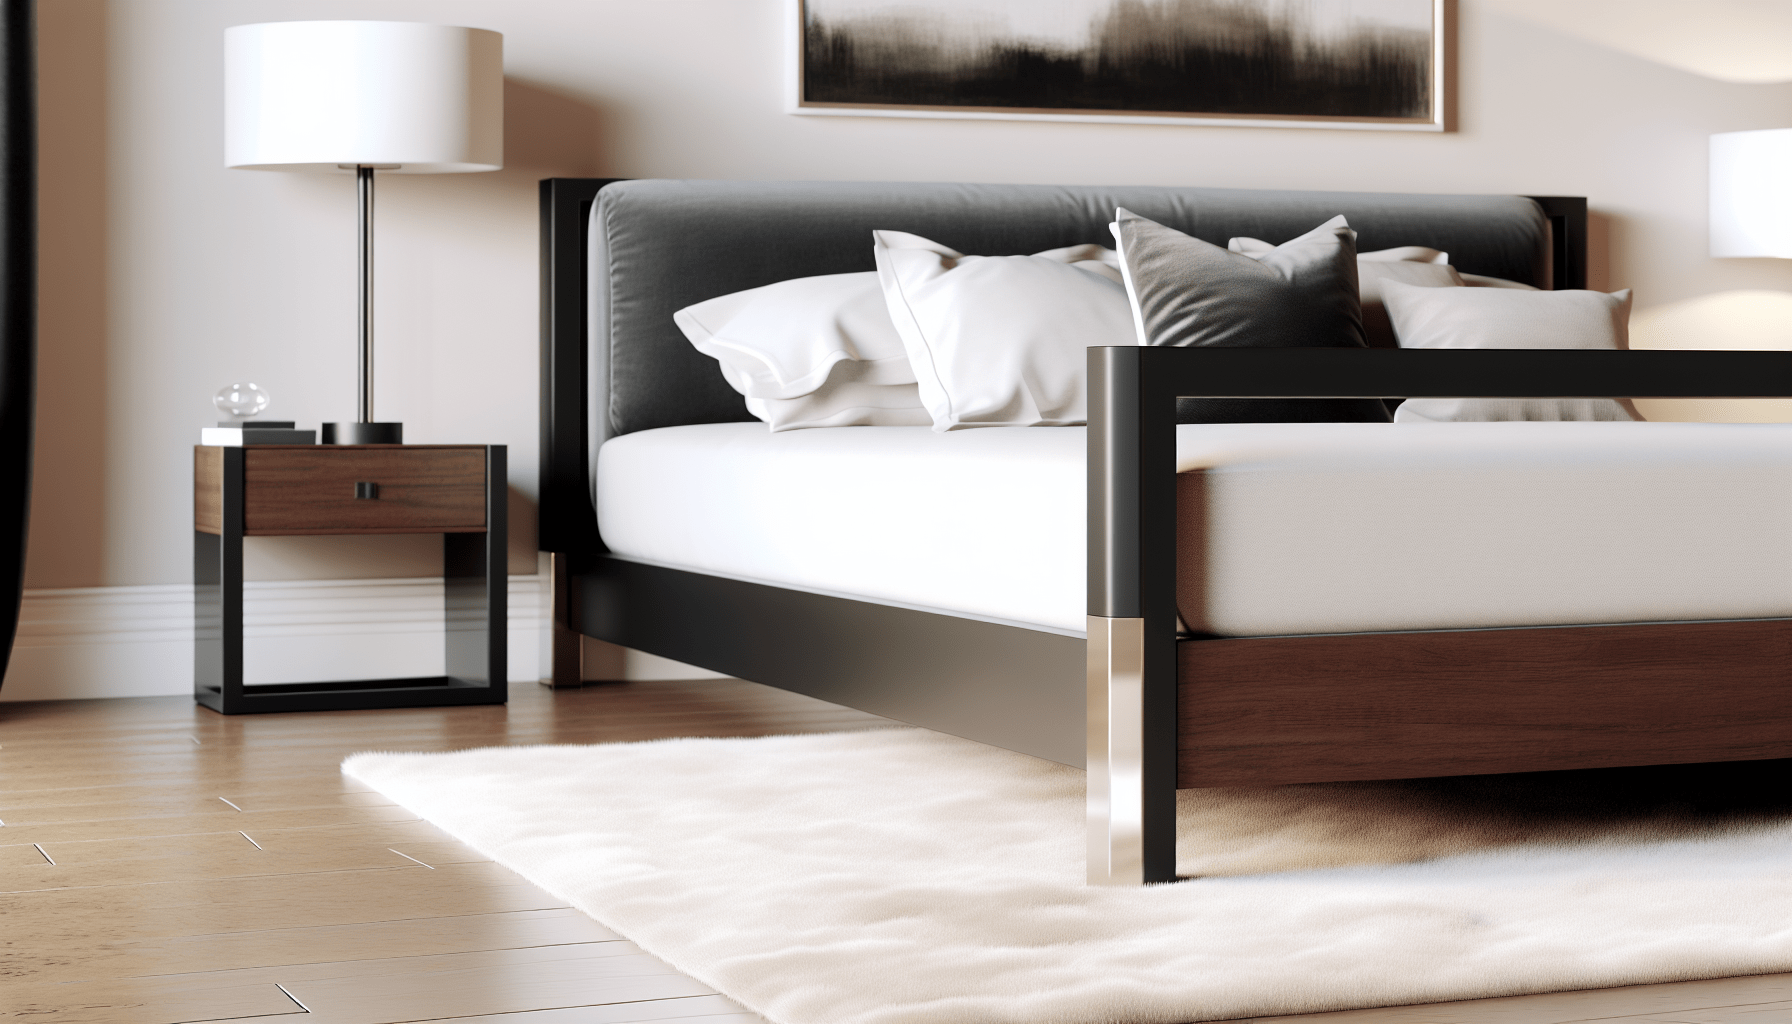 A stylish bed frame in a modern bedroom setting